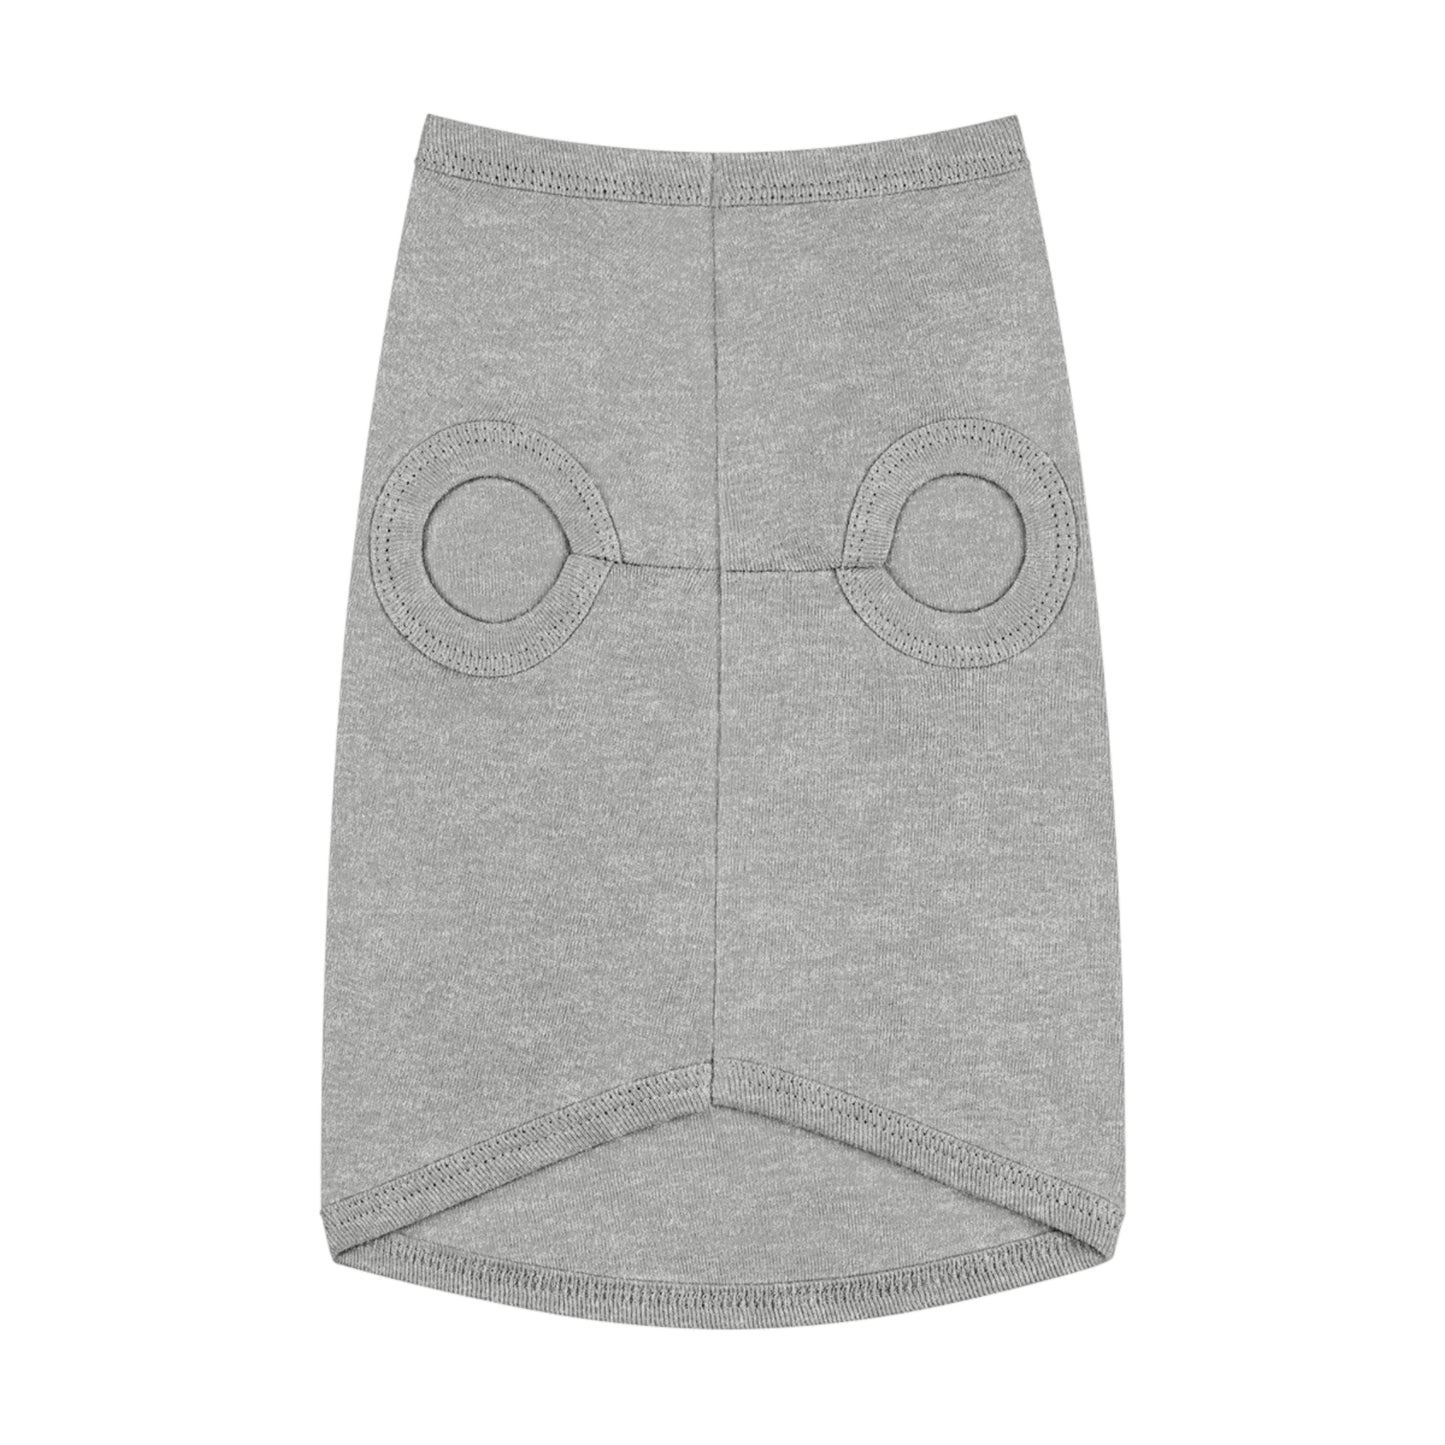 Anxious as Fuck Pet Tank Top - Express Your Pet's Emotions with Style